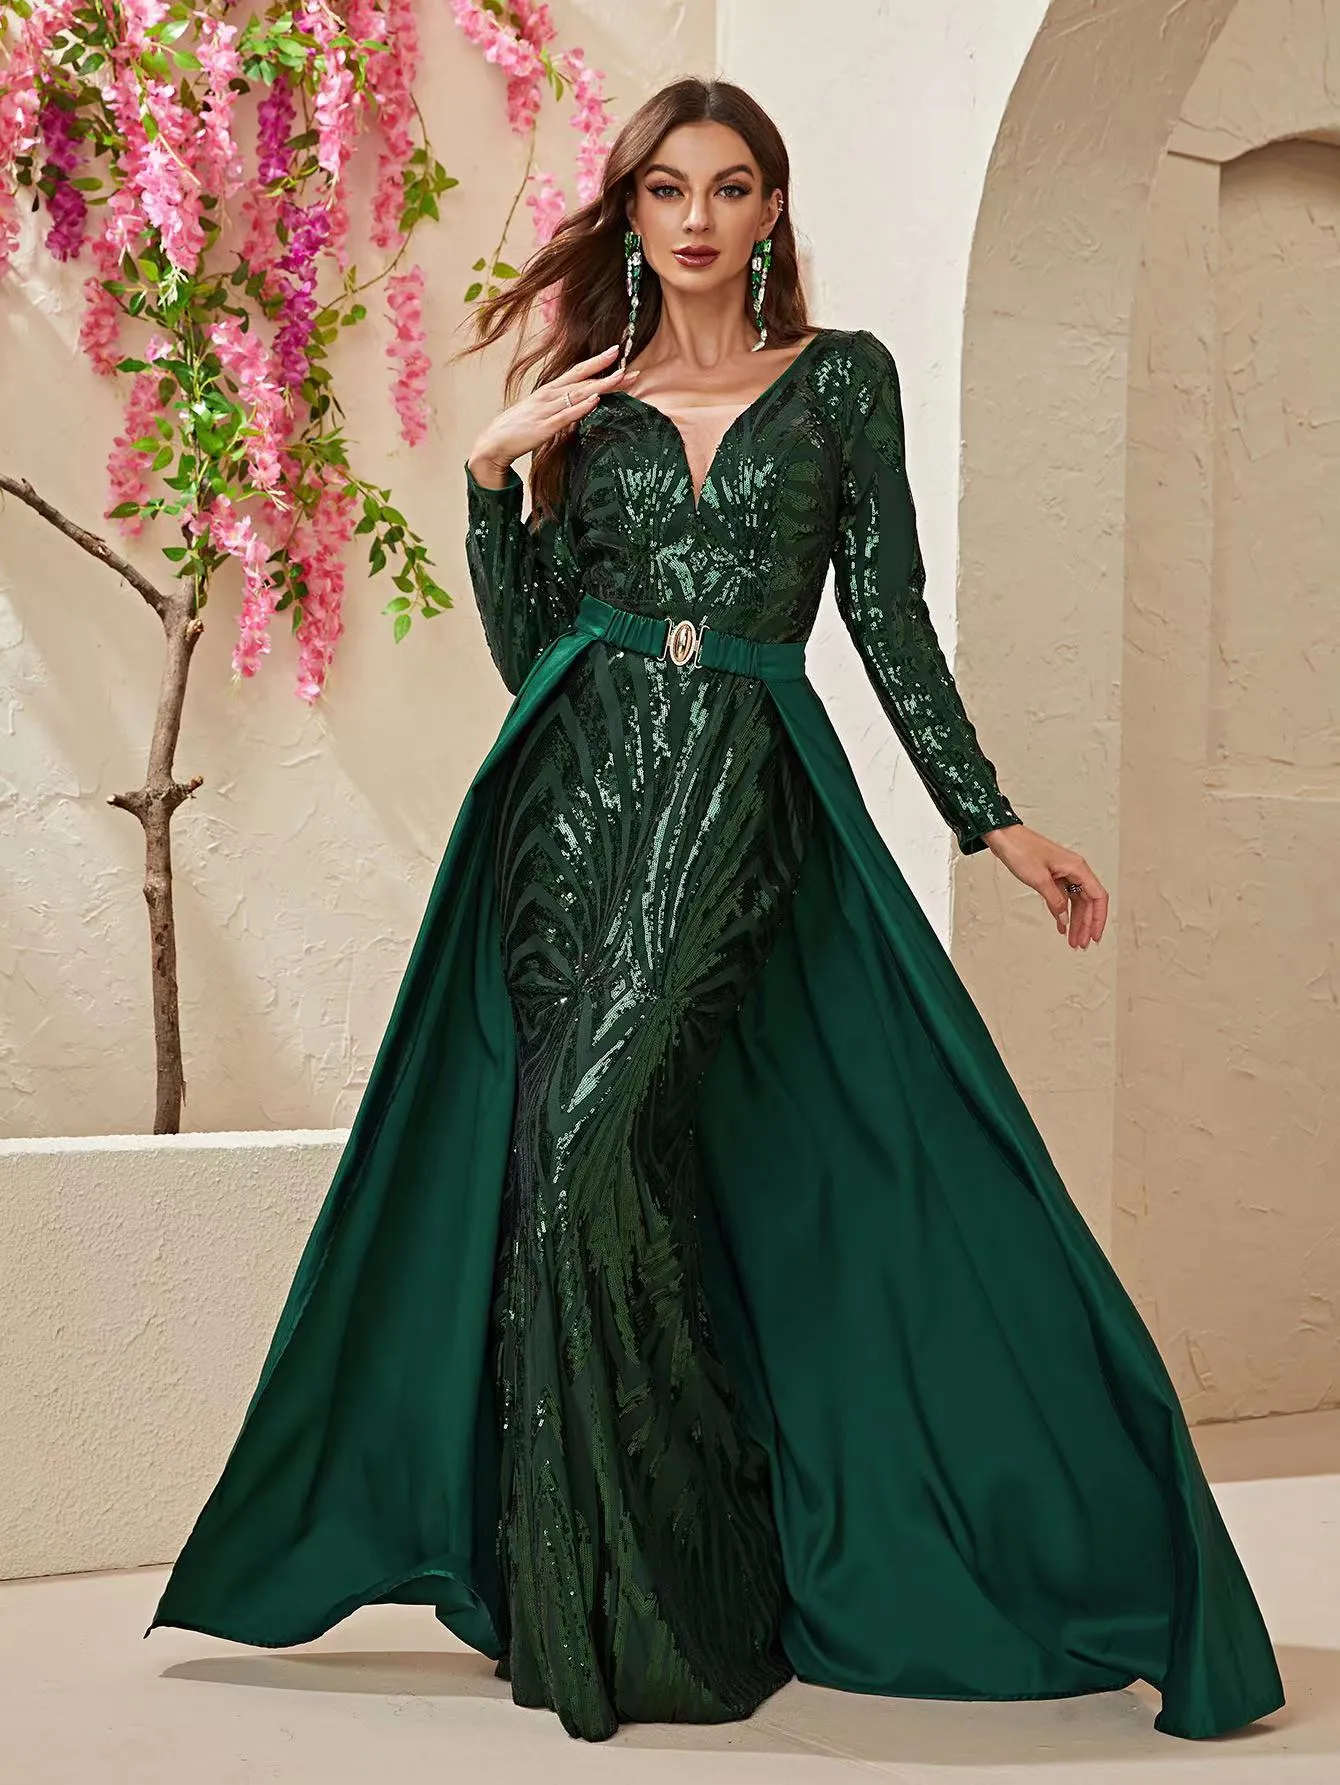 Black Lace Applique Illusion Top Evening Gowns With Slits With Long Sleeves  And High Split Customizable Prom Gown From Weddingfactory, $148.75 |  DHgate.Com